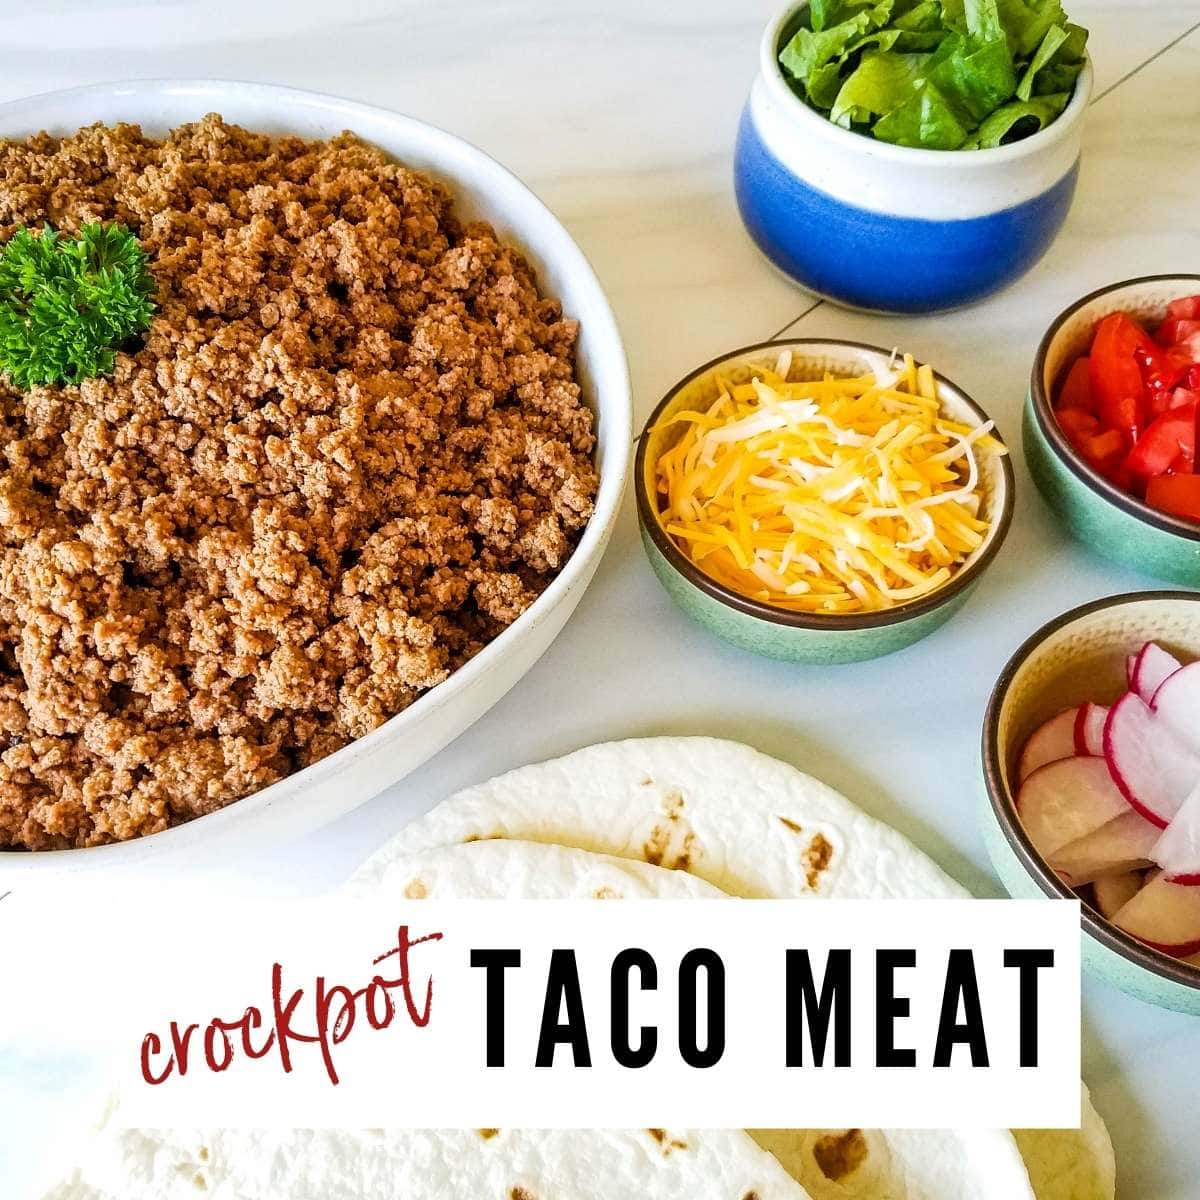 Cooked meat in a white bowl, small bowls of cheese, radishes, lettuce& tomatoes and tortillas on a white counter top with Crockpot Taco Meat graphic overlay.